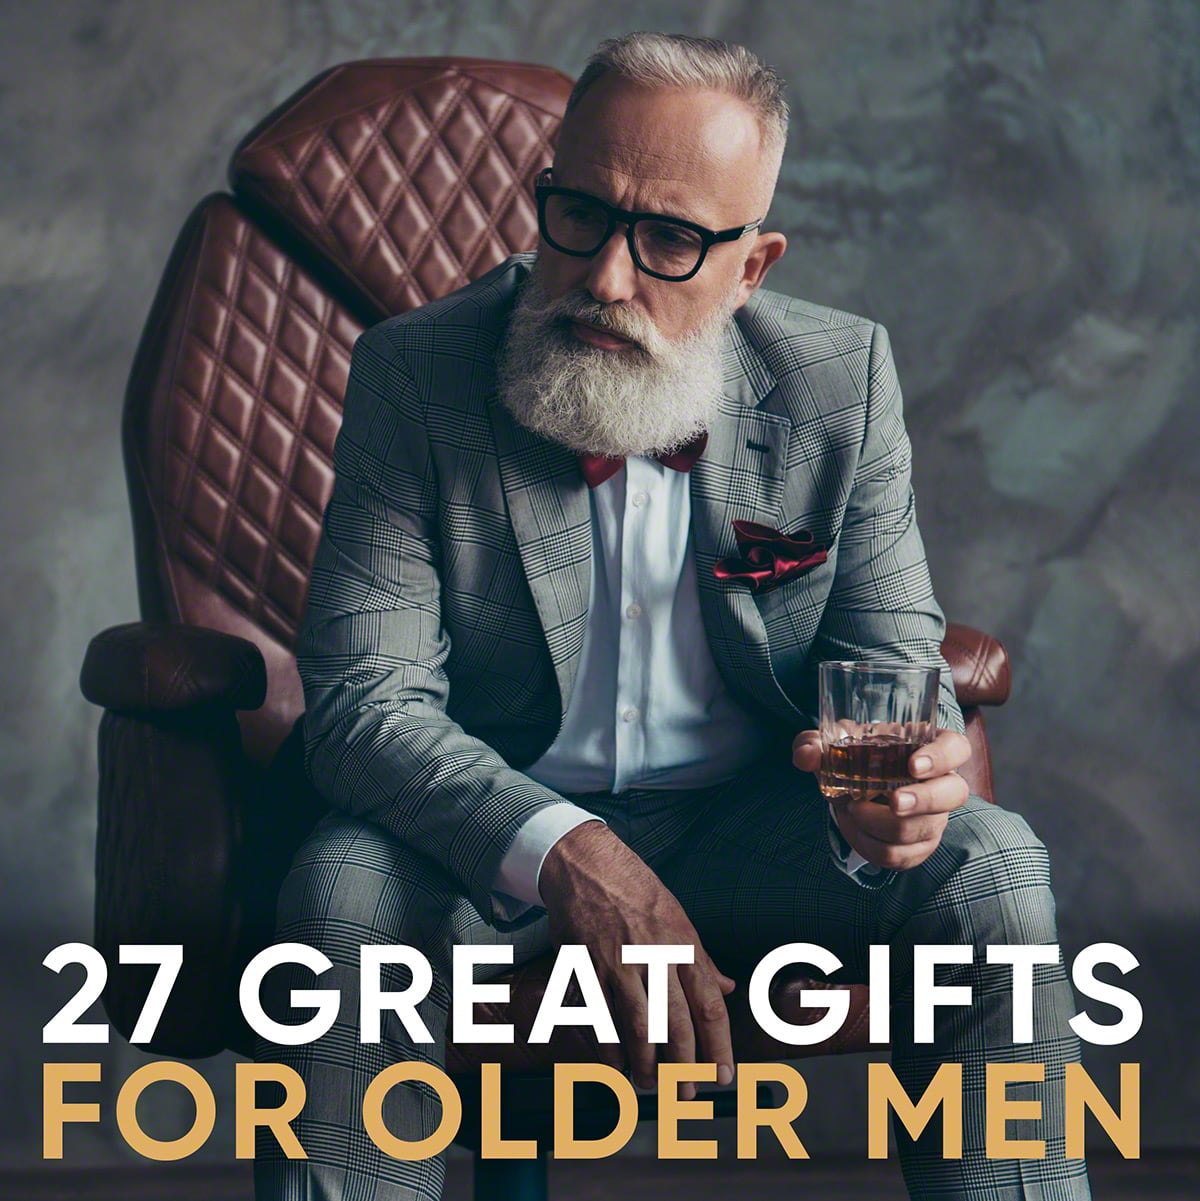 67+ Gifts for Elderly Men That Are Useful, Fun, or Helpful!